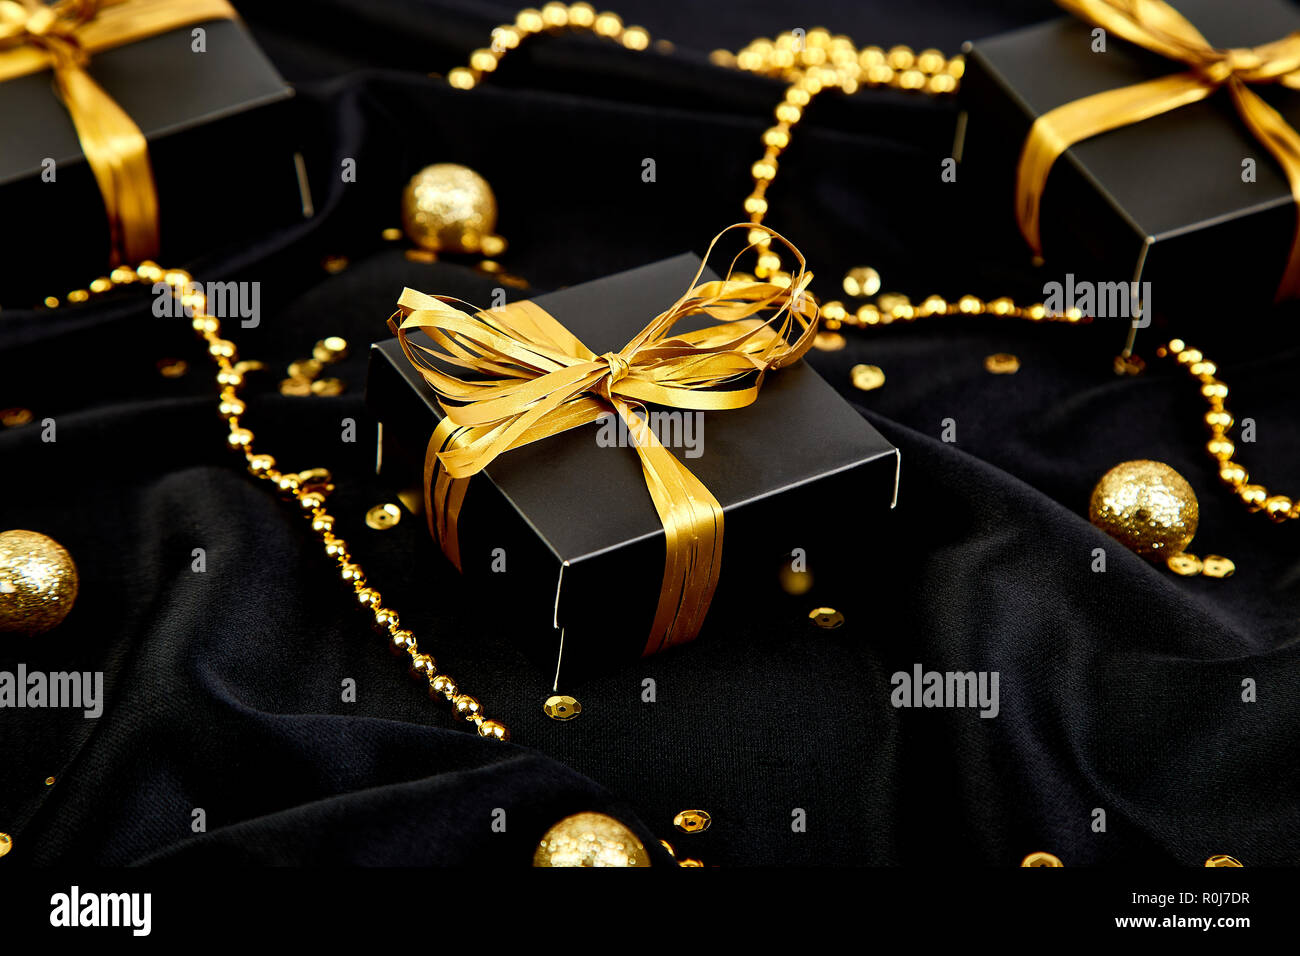 Louis Vuitton Christmas NYE embossed gold on gold ribbon gift